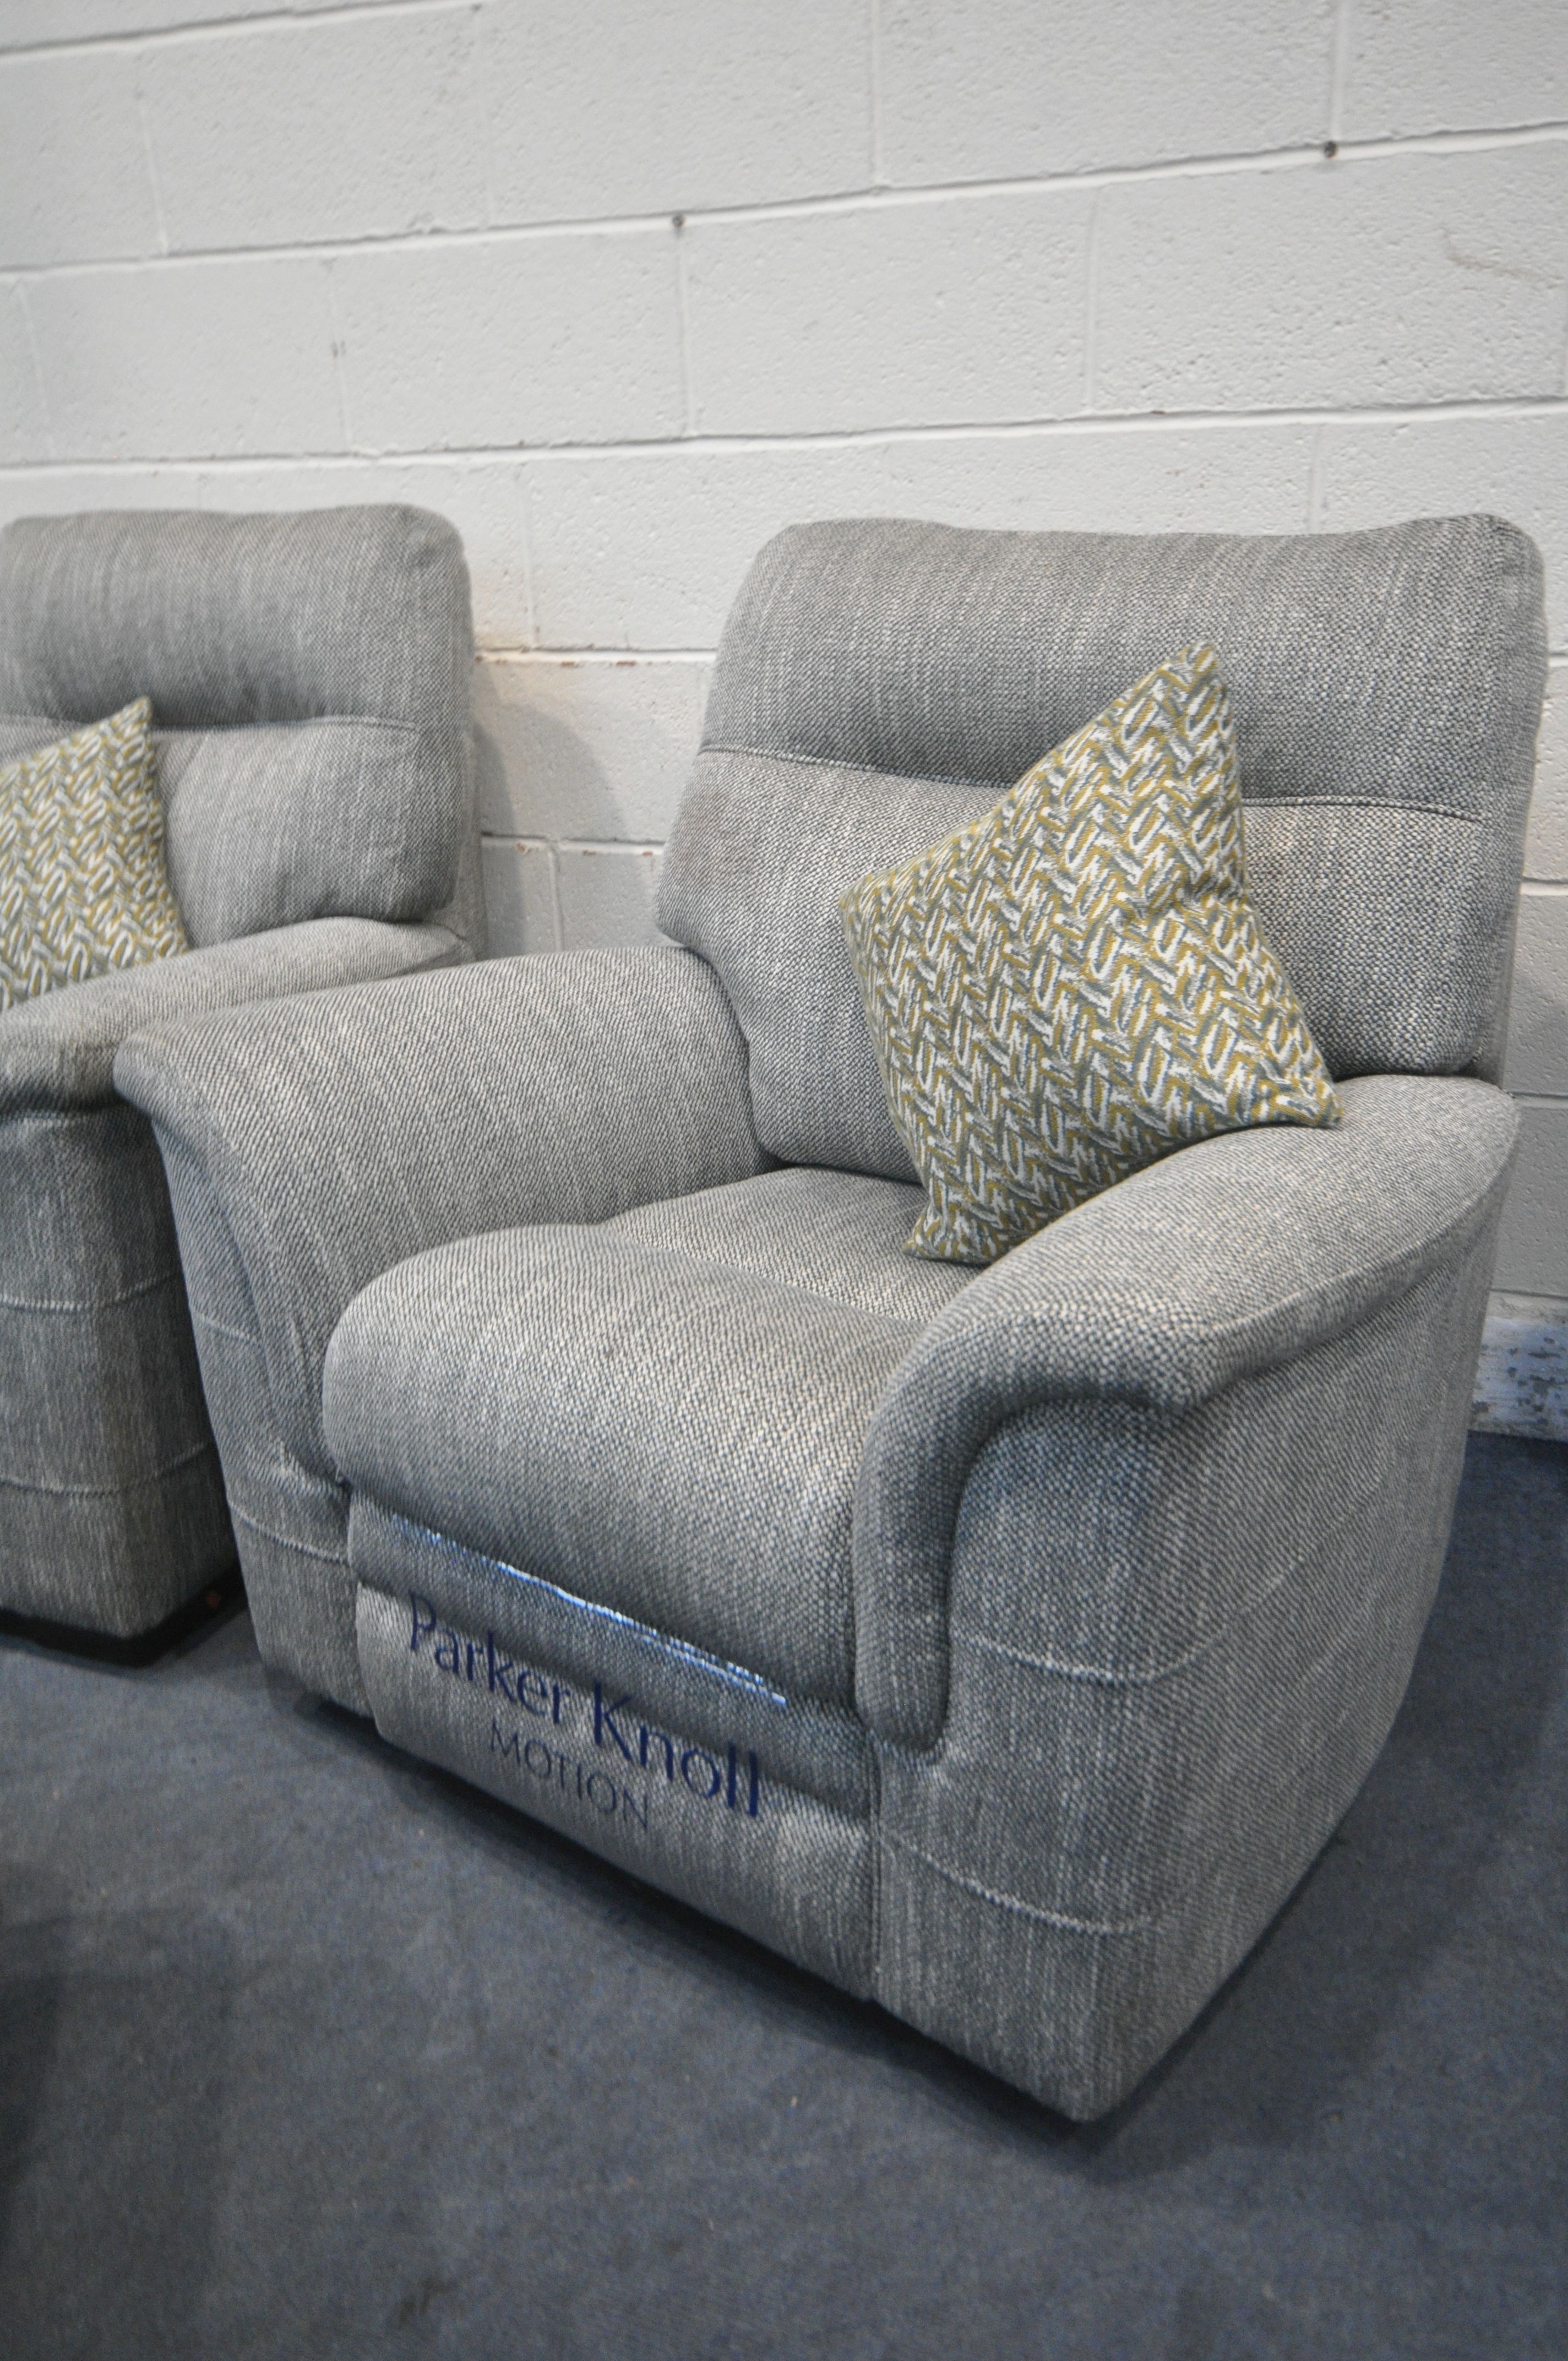 A PARKER KNOLL BLACK AND WHITE PATTERNED THREE PIECE LOUNGE SUITE, comprising a three seater settee, - Image 3 of 5